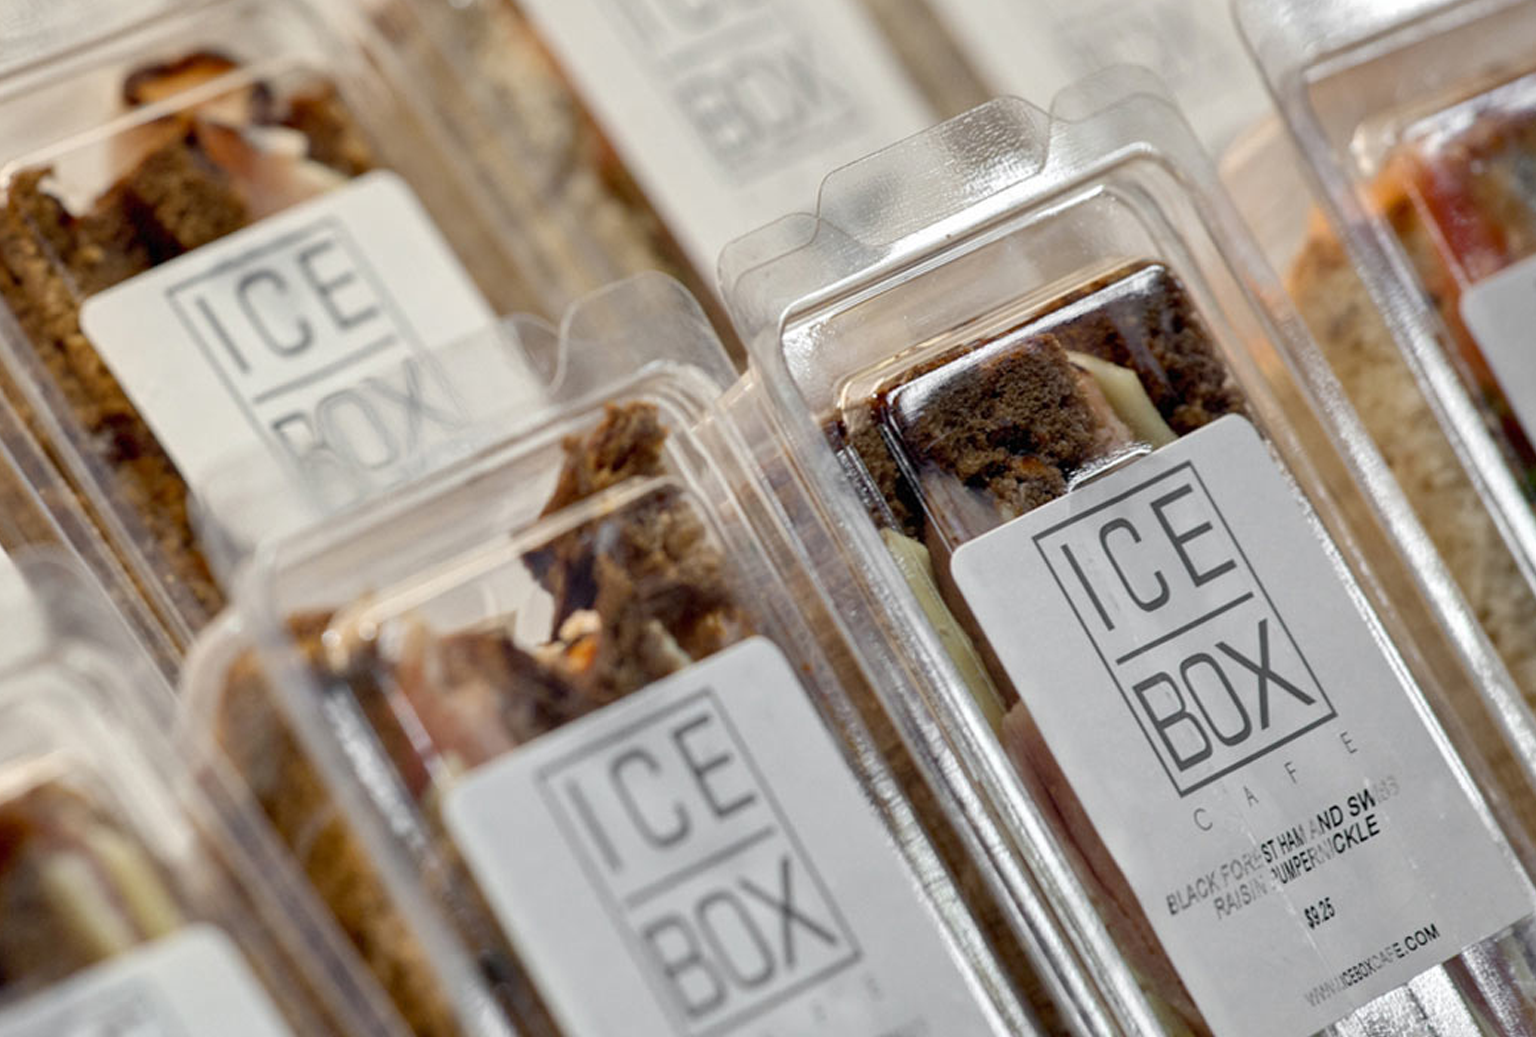 Icebox Pantry Wholesale Packages